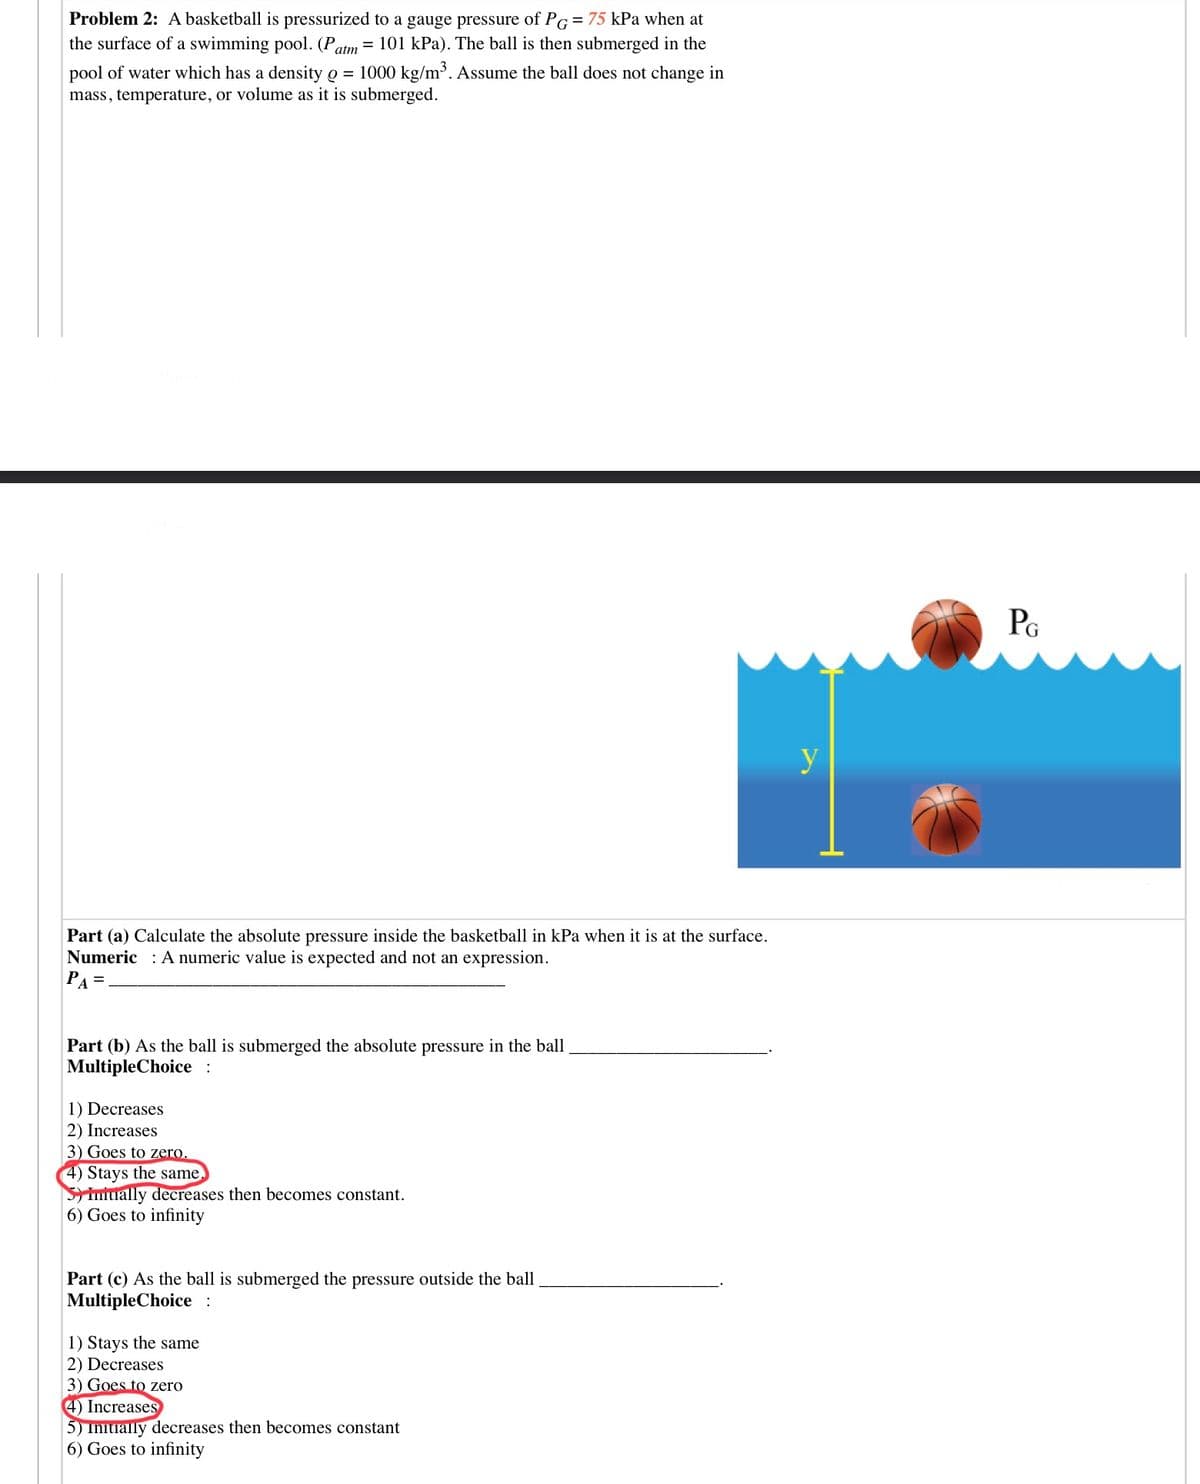 Problem 2: A basketball is pressurized to a gauge pressure of PG=75 kPa when at
the surface of a swimming pool. (Patm= 101 kPa). The ball is then submerged in the
pool of water which has a density o = 1000 kg/m³. Assume the ball does not change in
mass, temperature, or volume as it is submerged.
PG
y
Part (a) Calculate the absolute pressure inside the basketball in kPa when it is at the surface.
Numeric : A numeric value is expected and not an expression.
PA =
Part (b) As the ball is submerged the absolute pressure in the ball
MultipleChoice :
1) Decreases
2) Increases
3) Goes to zero.
4) Stays the same
Simiually decreases then becomes constant.
6) Goes to infinity
Part (c) As the ball is submerged the pressure outside the ball
MultipleChoice :
1) Stays the same
2) Decreases
3) Goes to zero
4) Increases
5) Initially decreases then becomes constant
6) Goes to infinity
